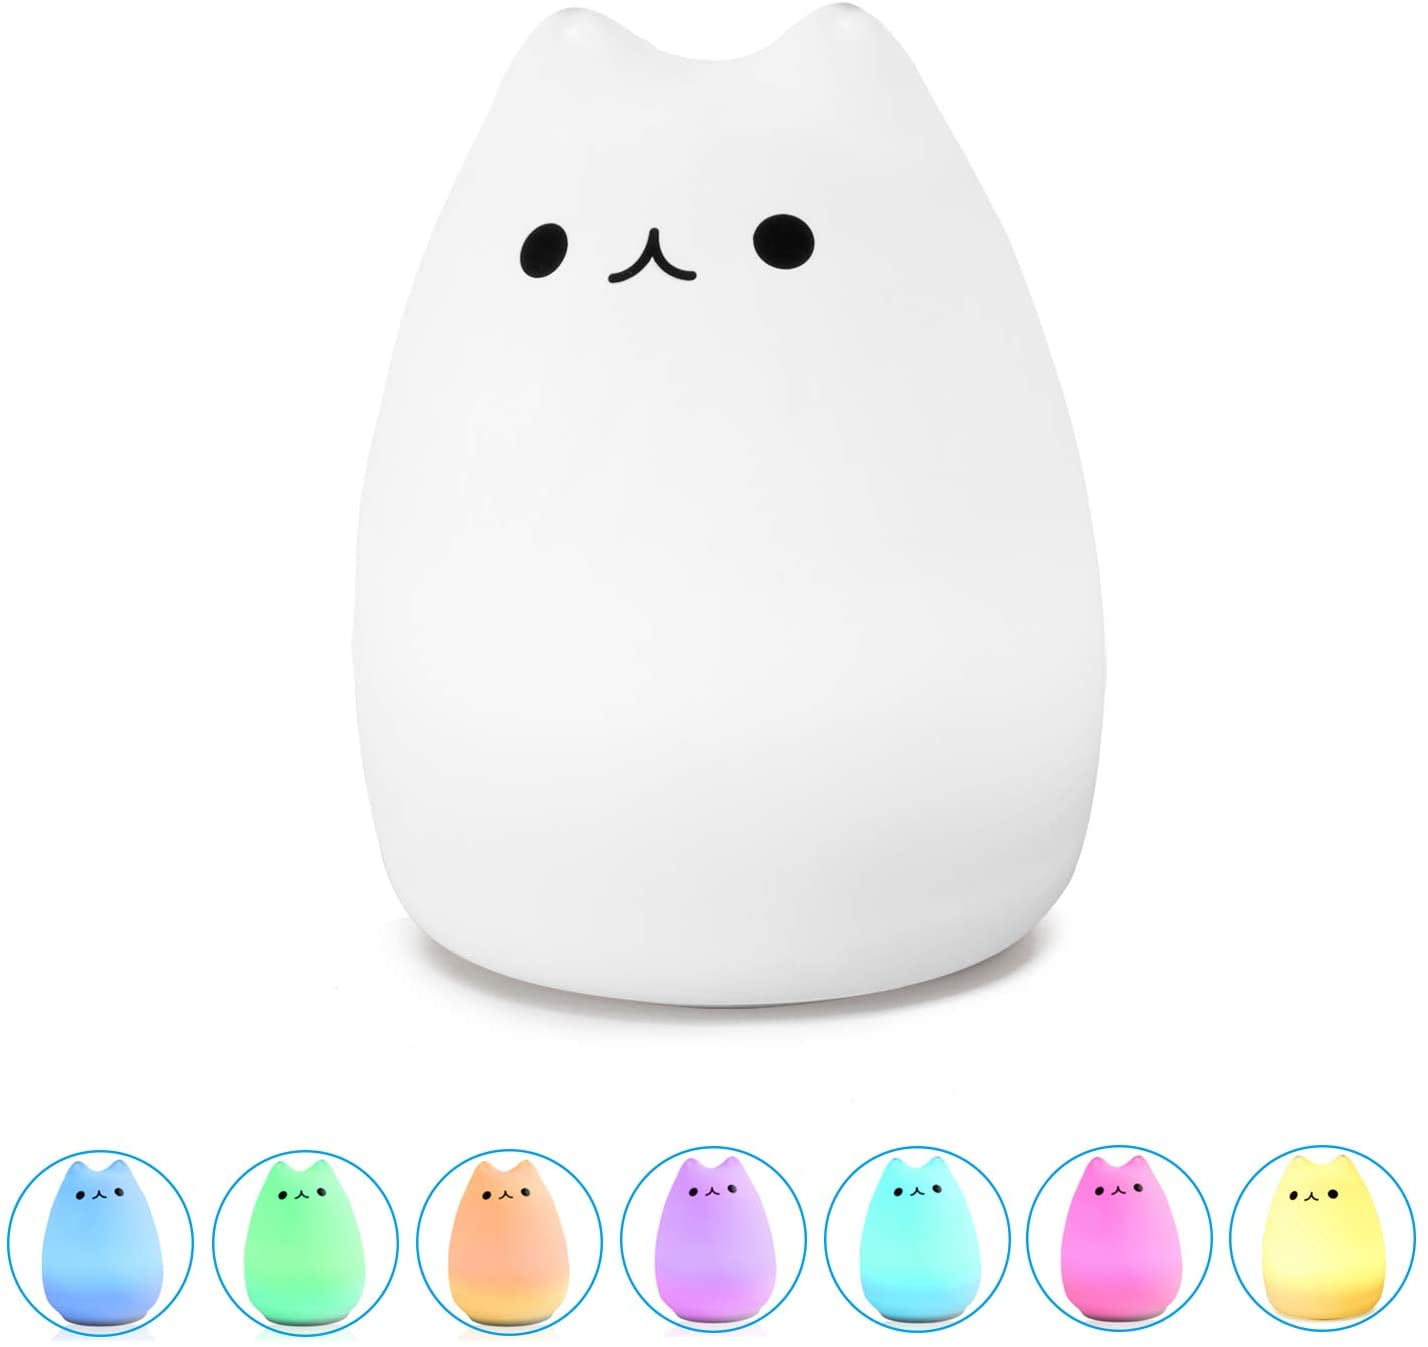 Kids Night light cat soft silicone LED 7 colors USB rechargeable bedside 